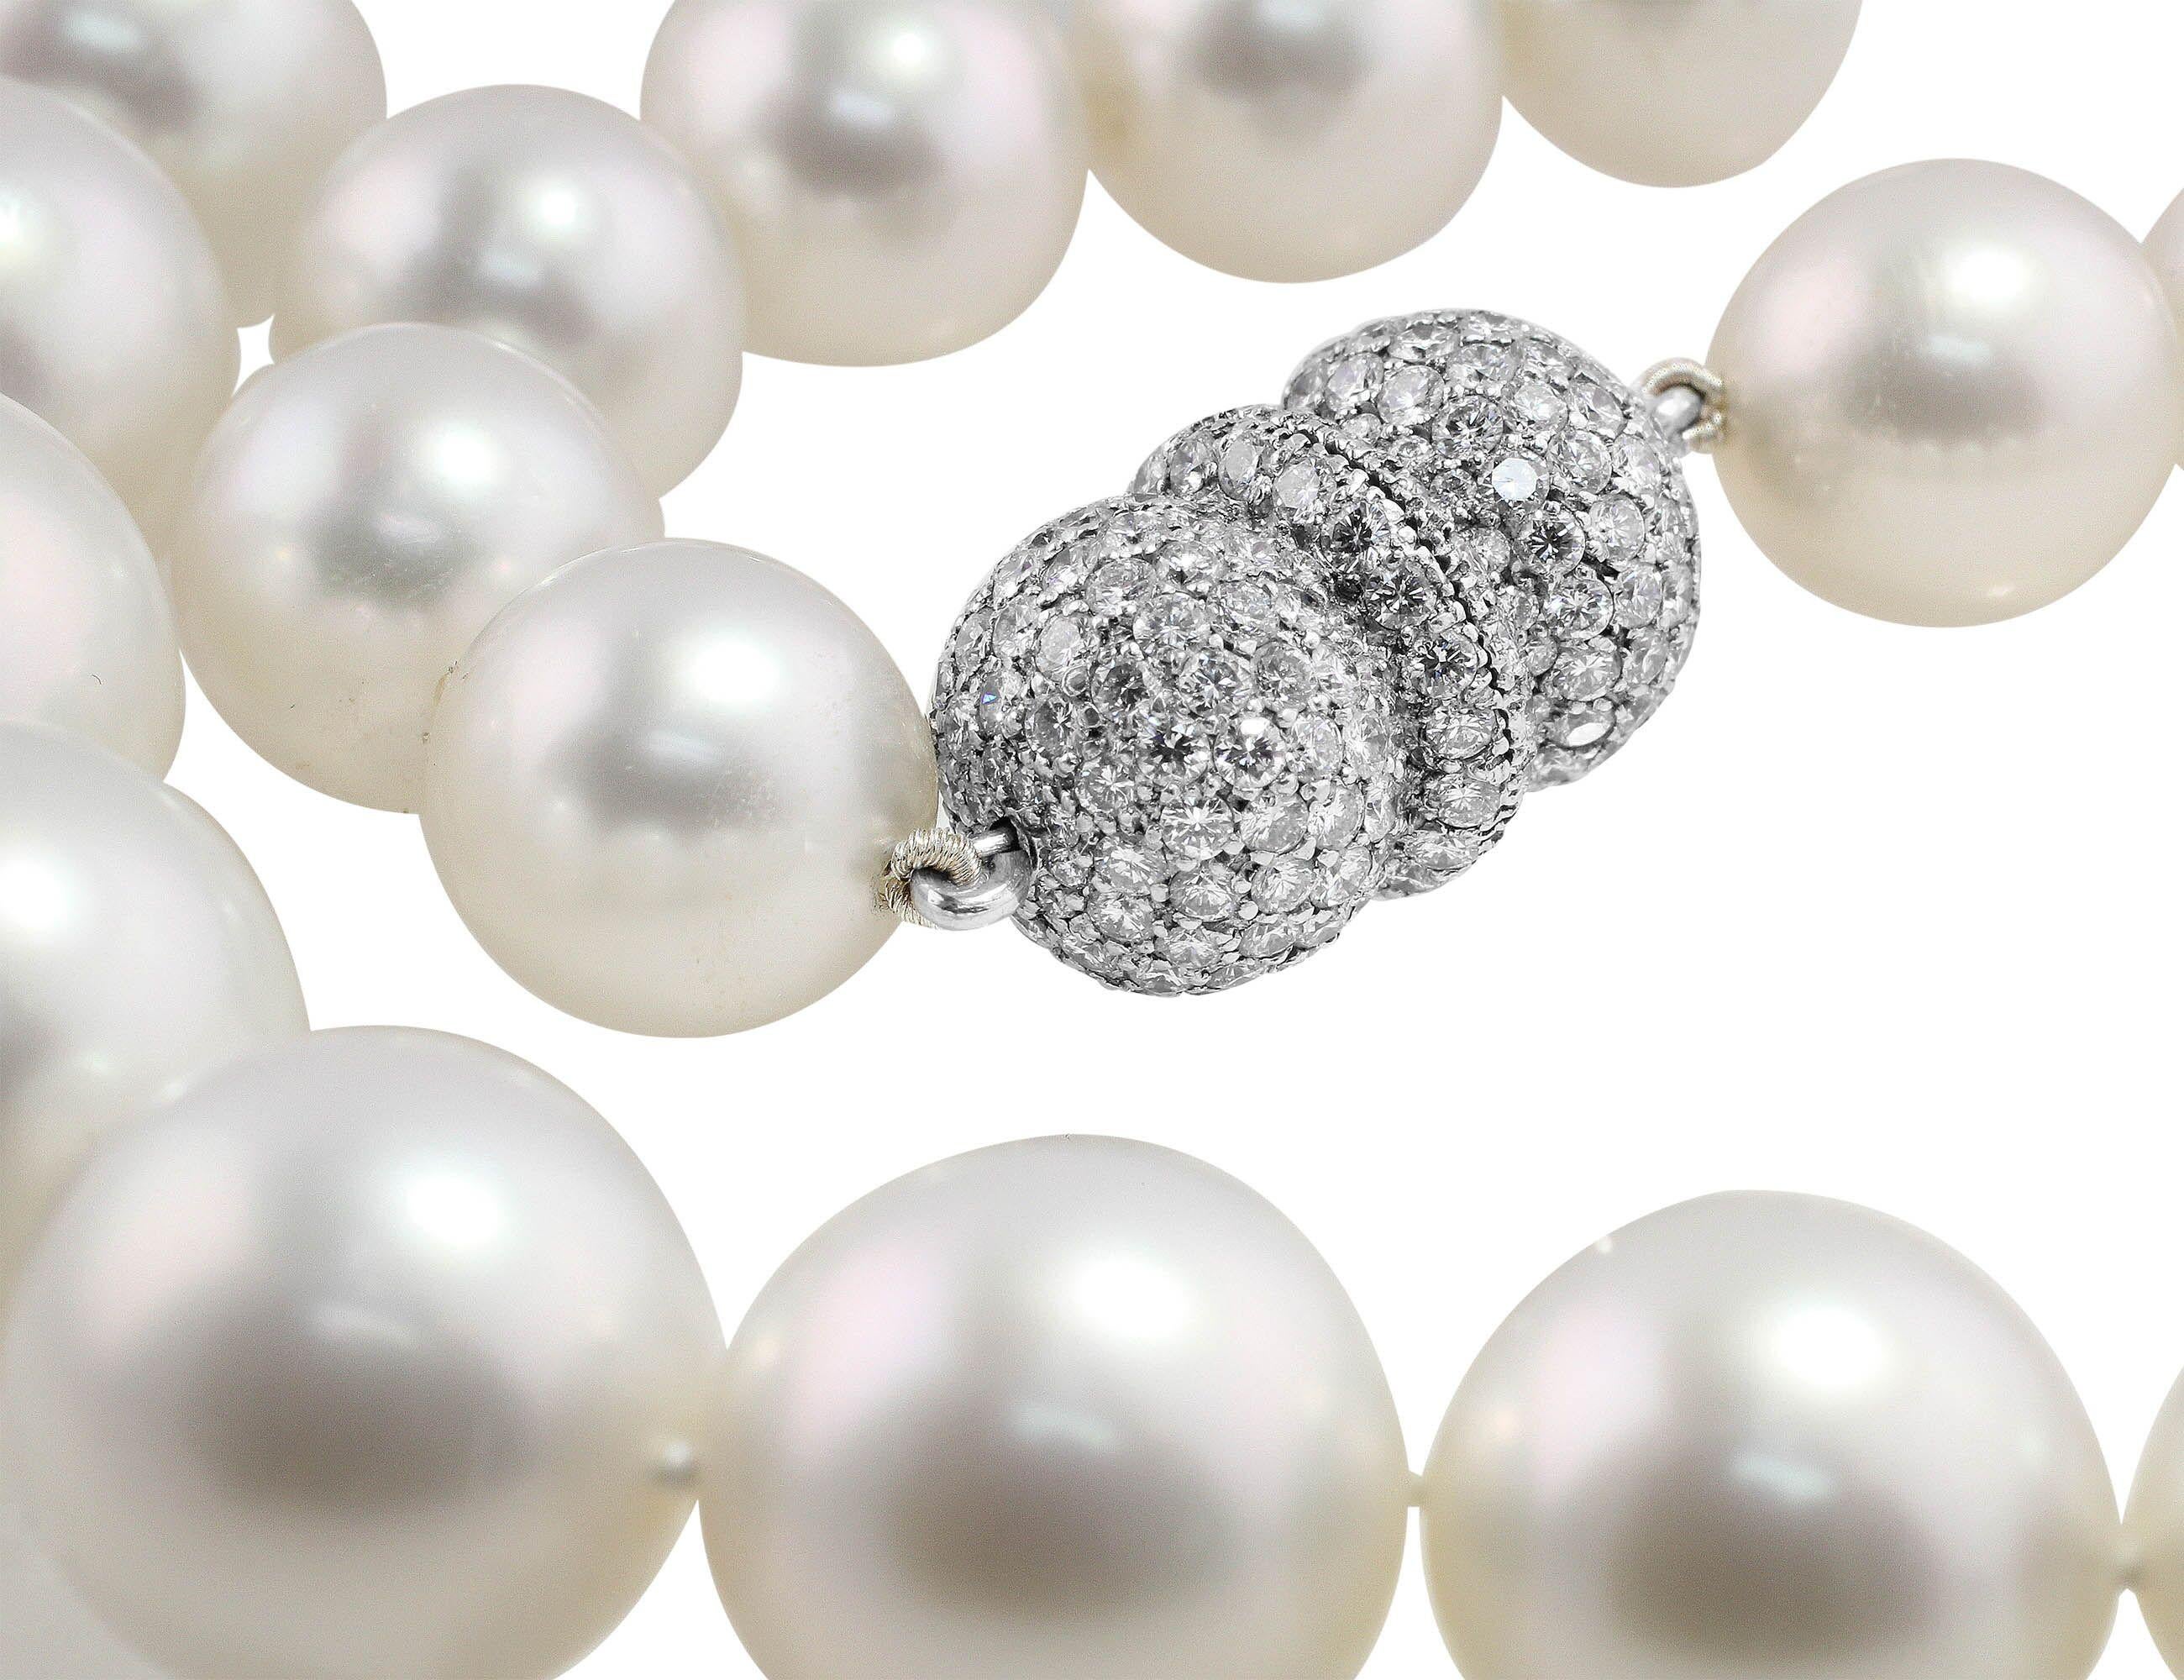 Gorgeous estate South Sea pearl necklace with pave diamond platinum clasp. This unique necklace features 31 South Sea pearls ranging from 12-15.75mm.